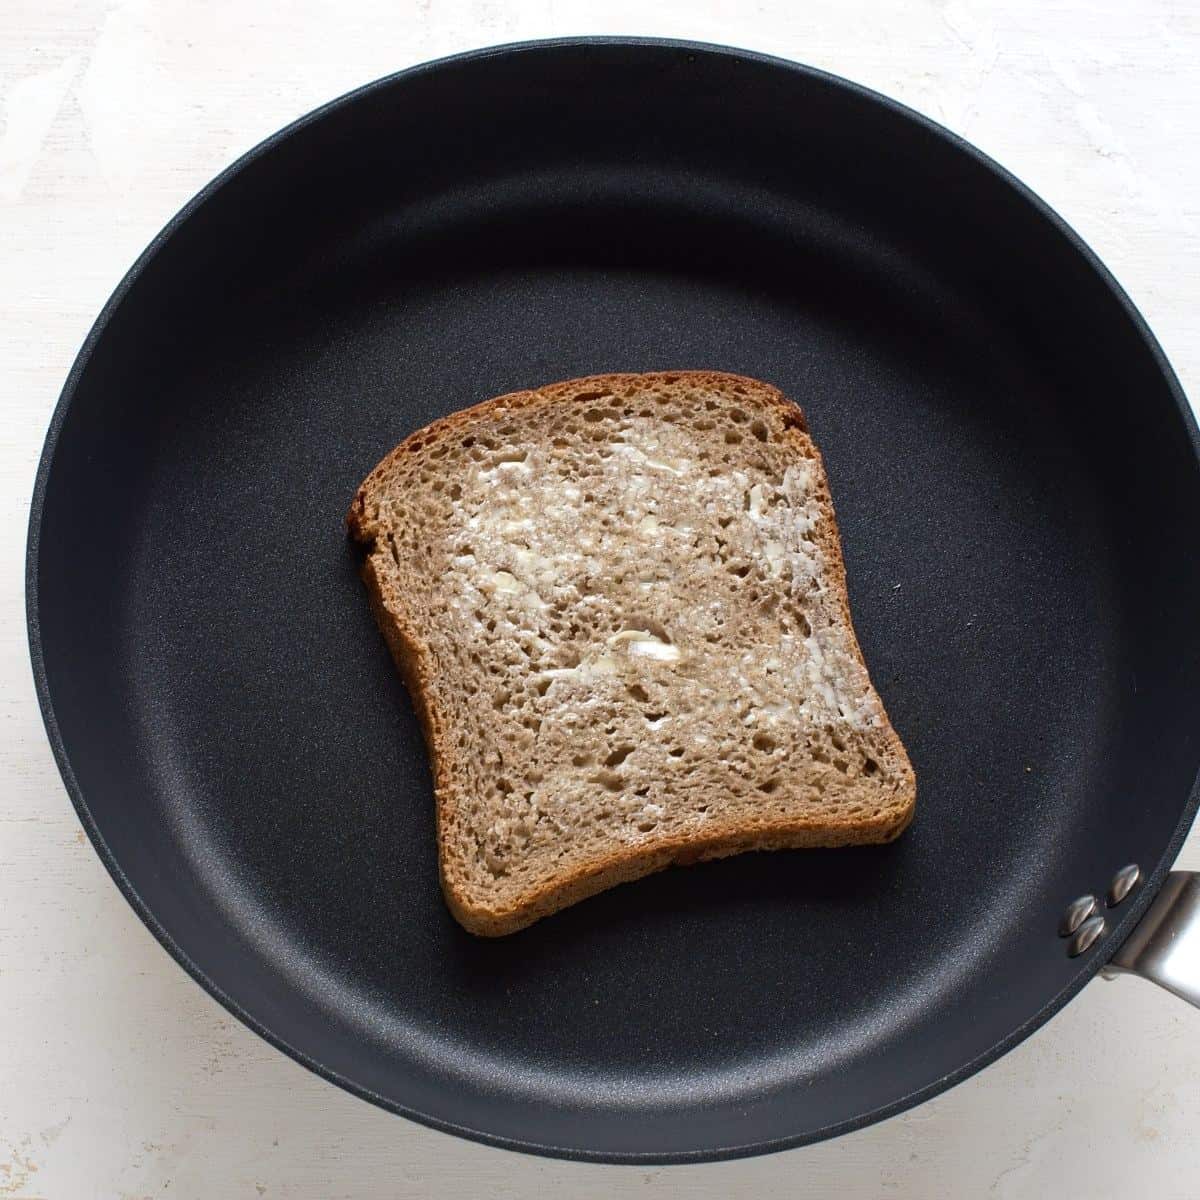 Frying a slice of bread in a skillet.